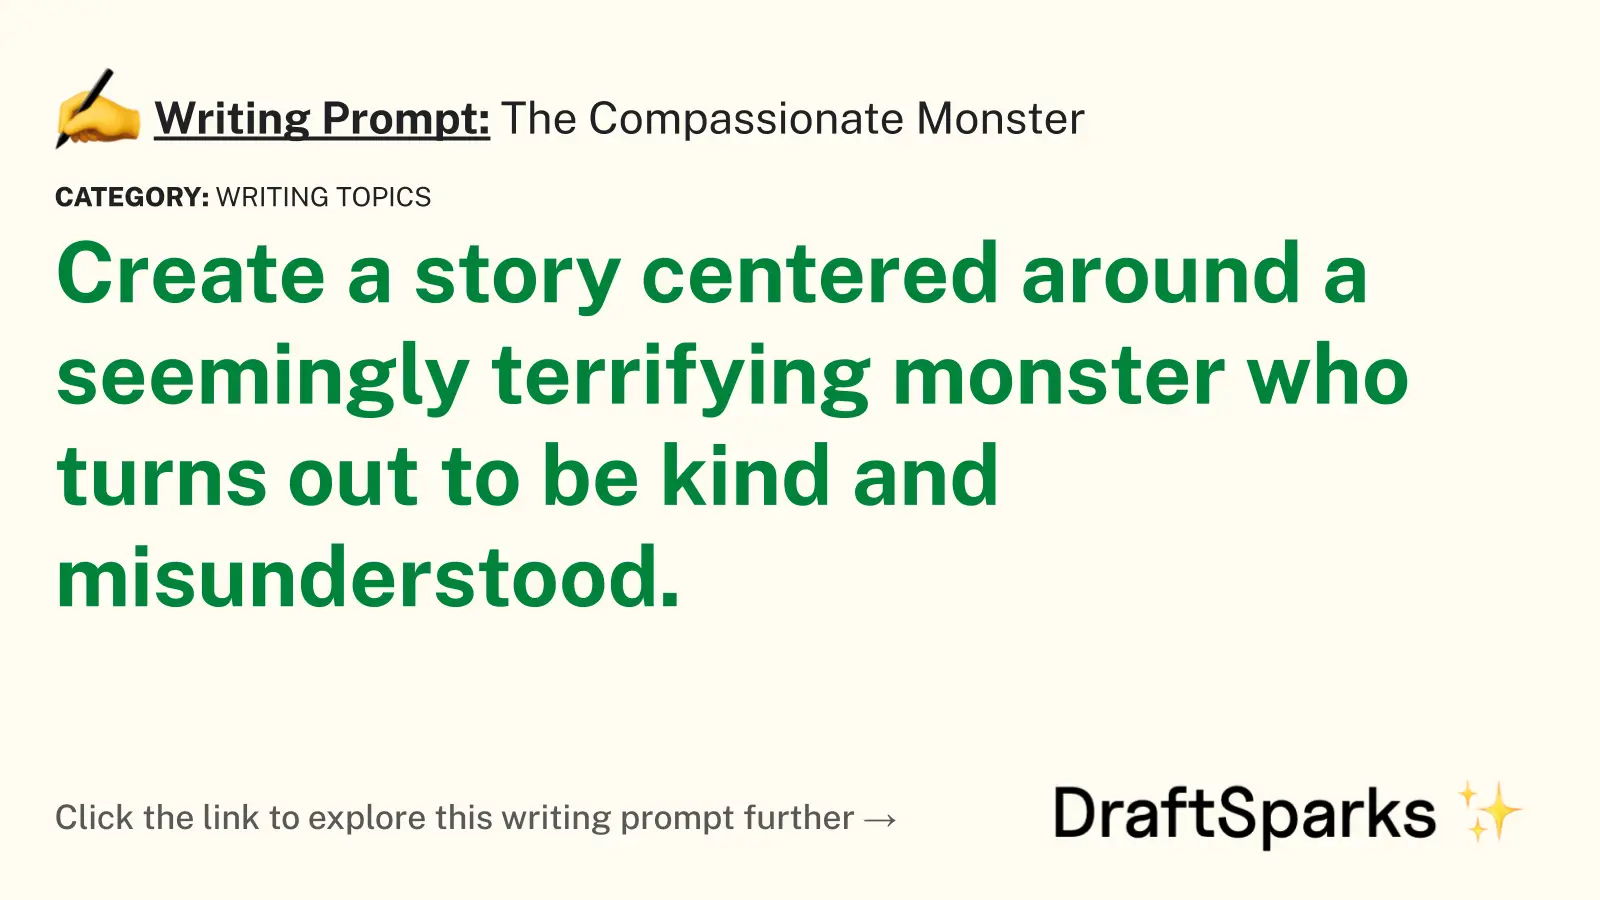 The Compassionate Monster